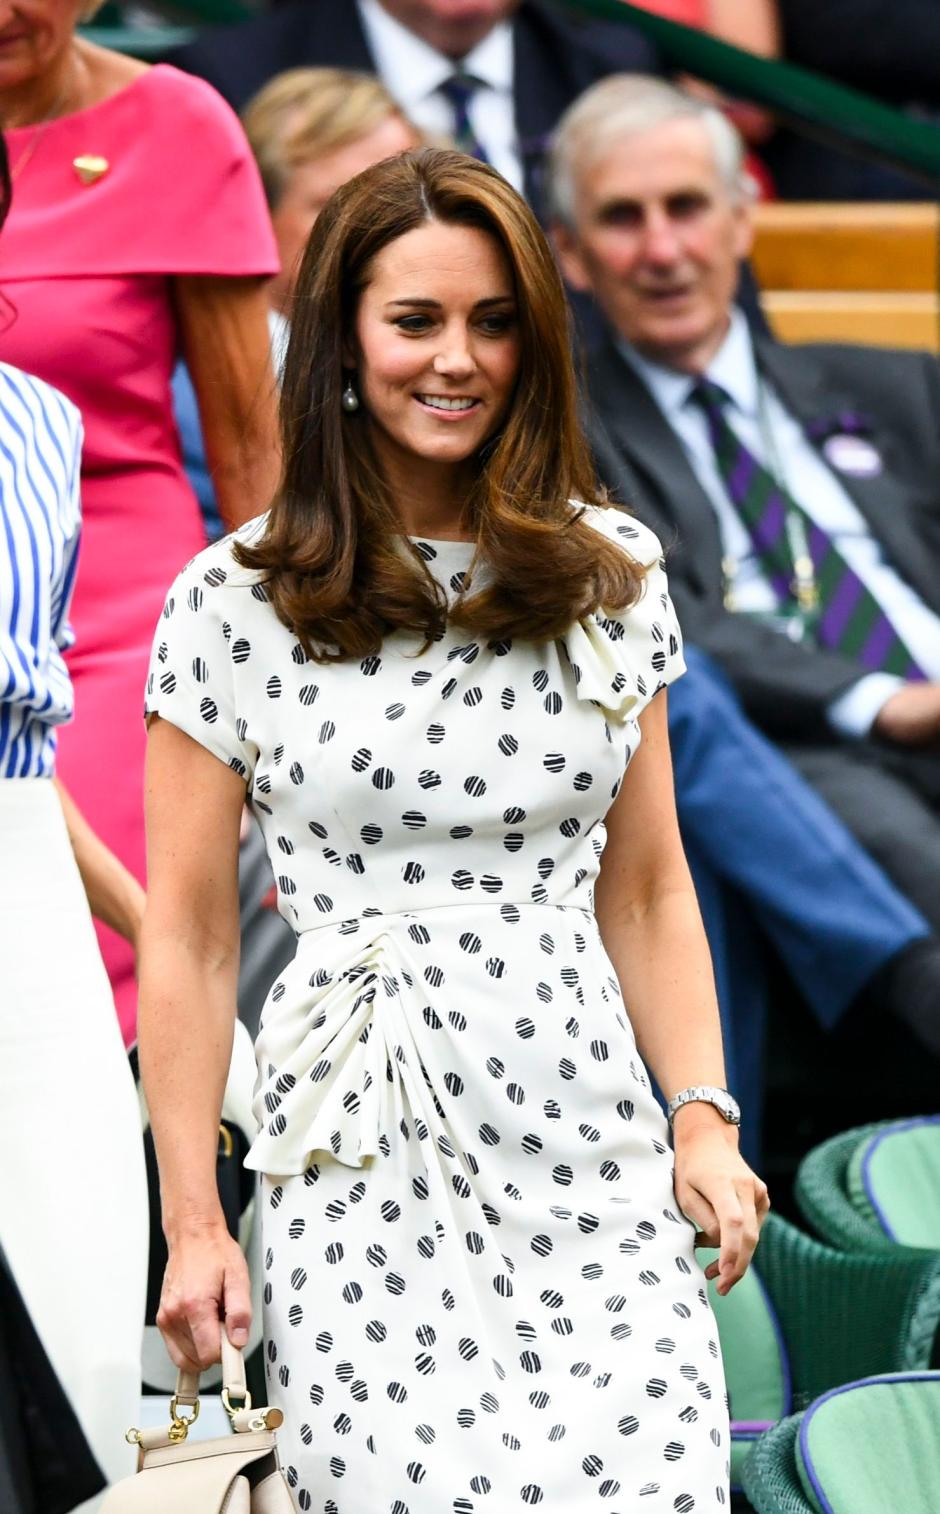 Catherine Duchess of Cambridge
Wimbledon Tennis Championships, Day 2, The All England Lawn Tennis and Croquet Club, London, UK - 02 Jul 2019
Shoes By Gianvito Rossi, Bag By Alexander McQueen, Belt By Alexander McQueen Wearing Suzannah Worn Before
Wearing Suzannah London